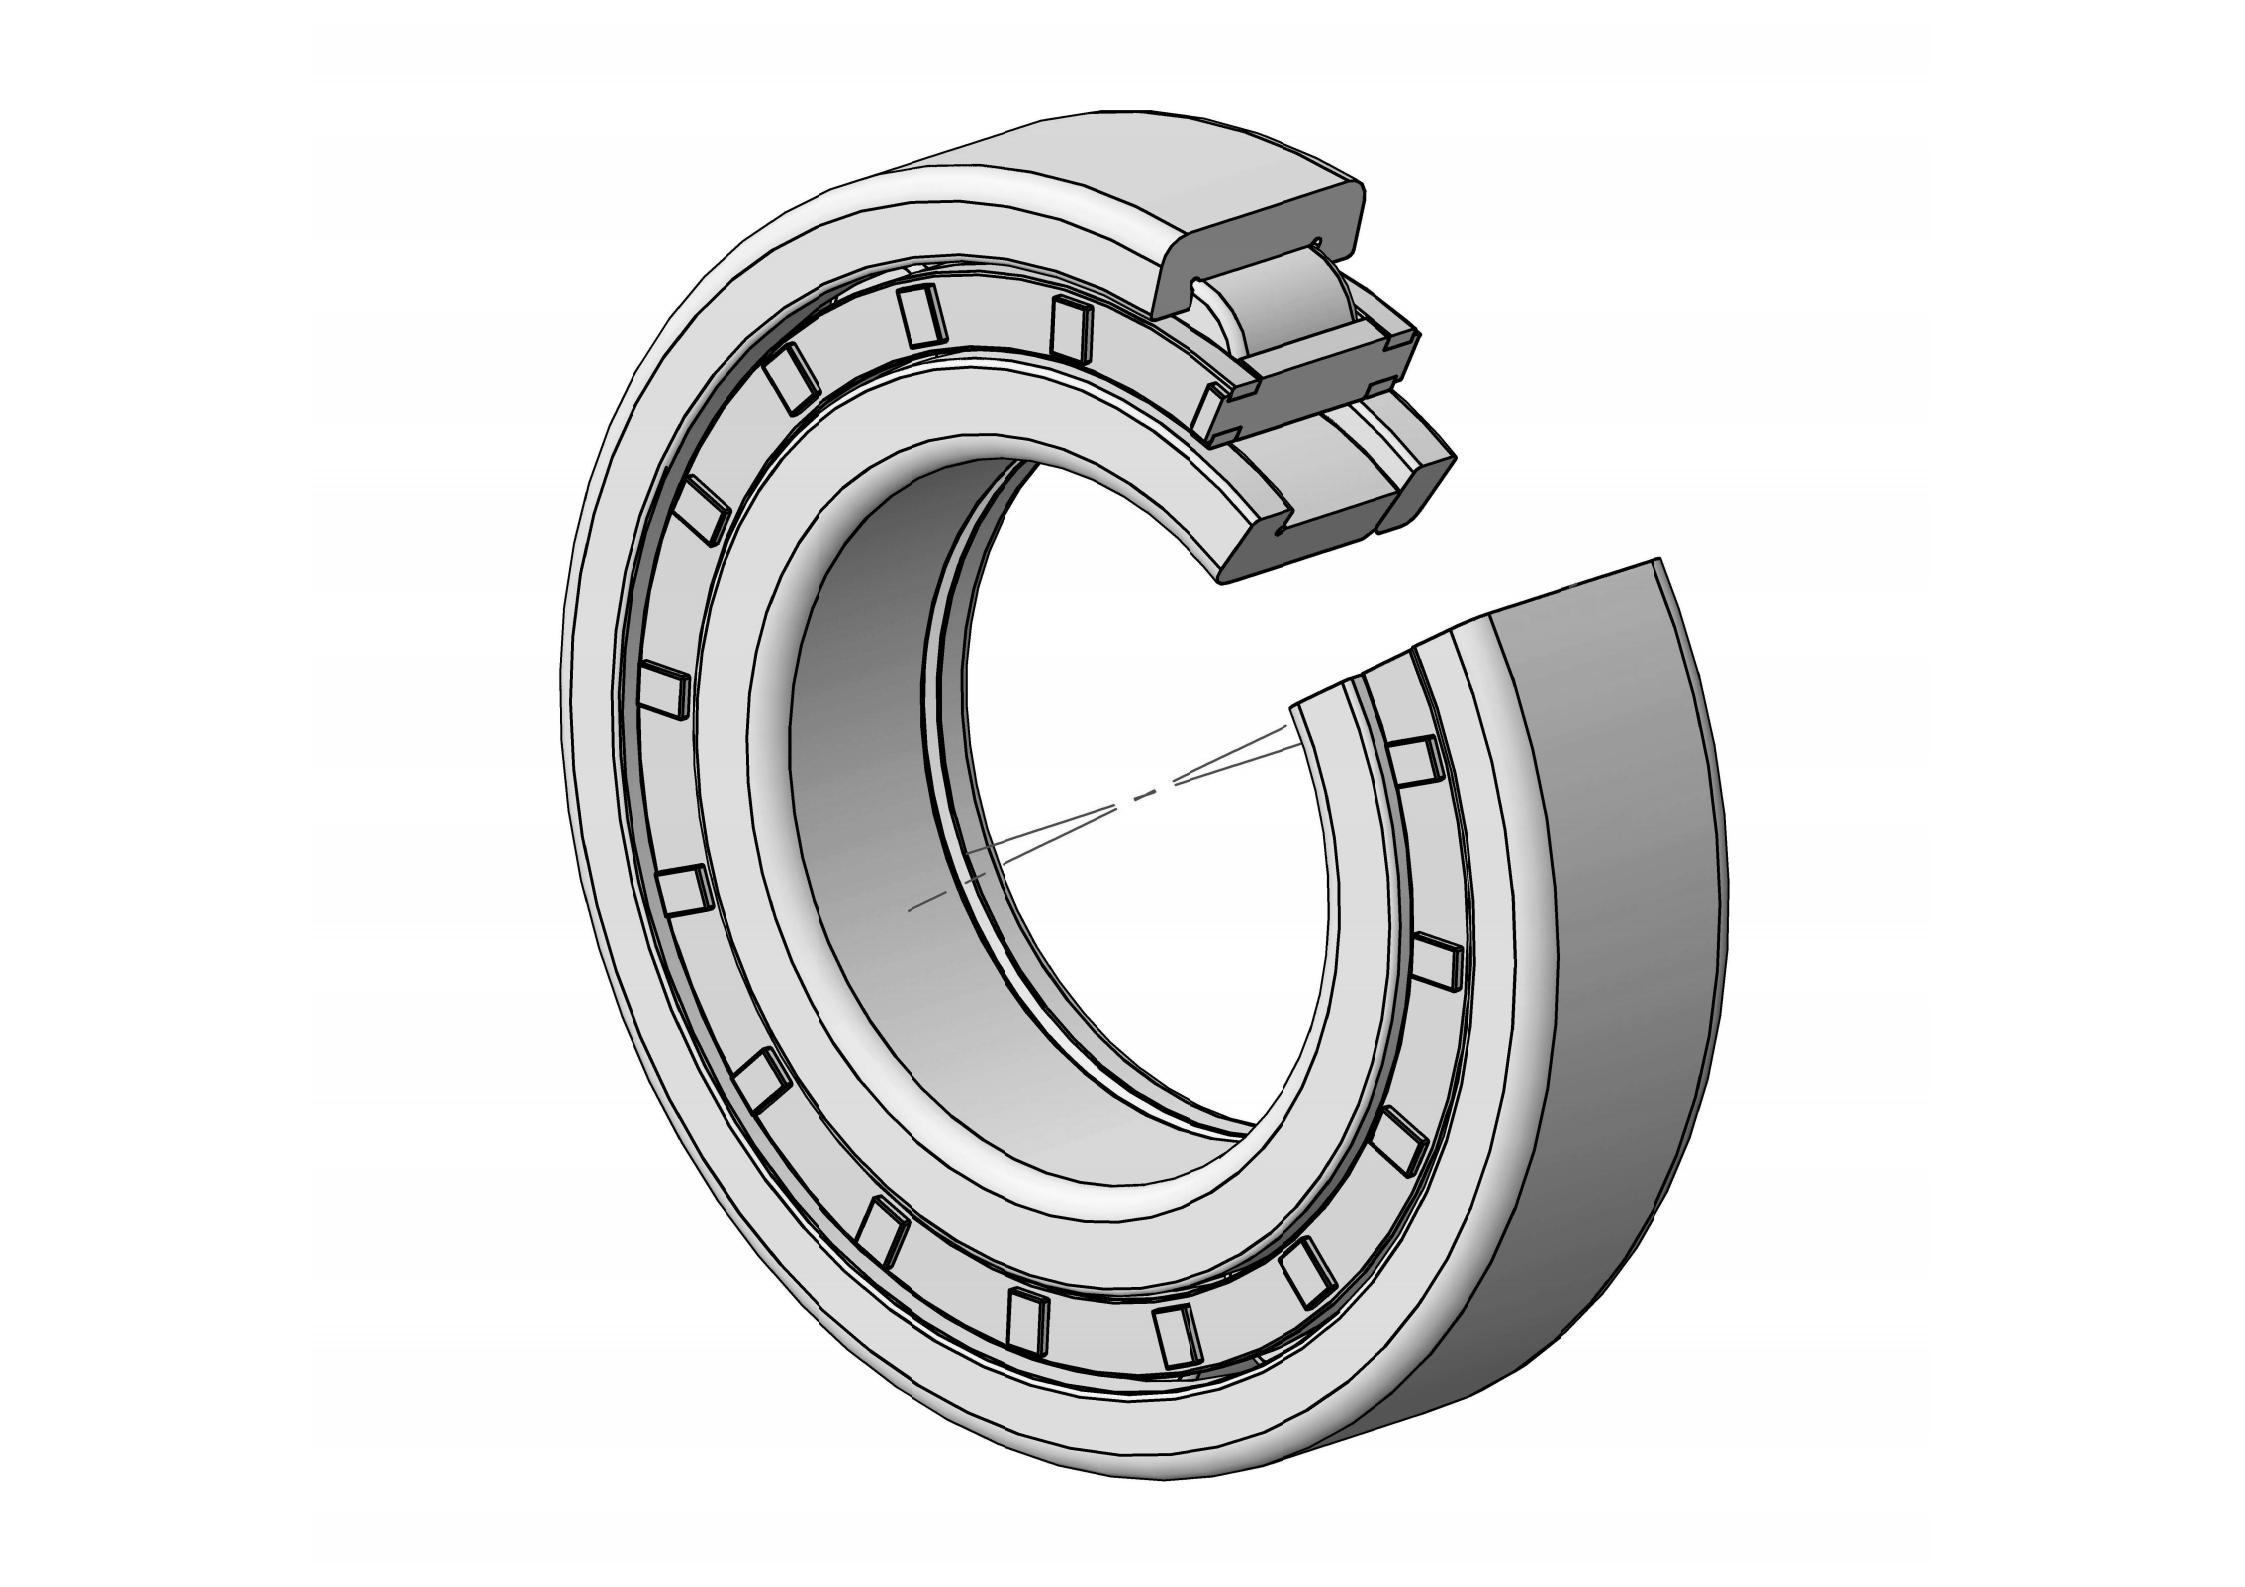 NUP307-E Single Row Cylindrical roller bearing 